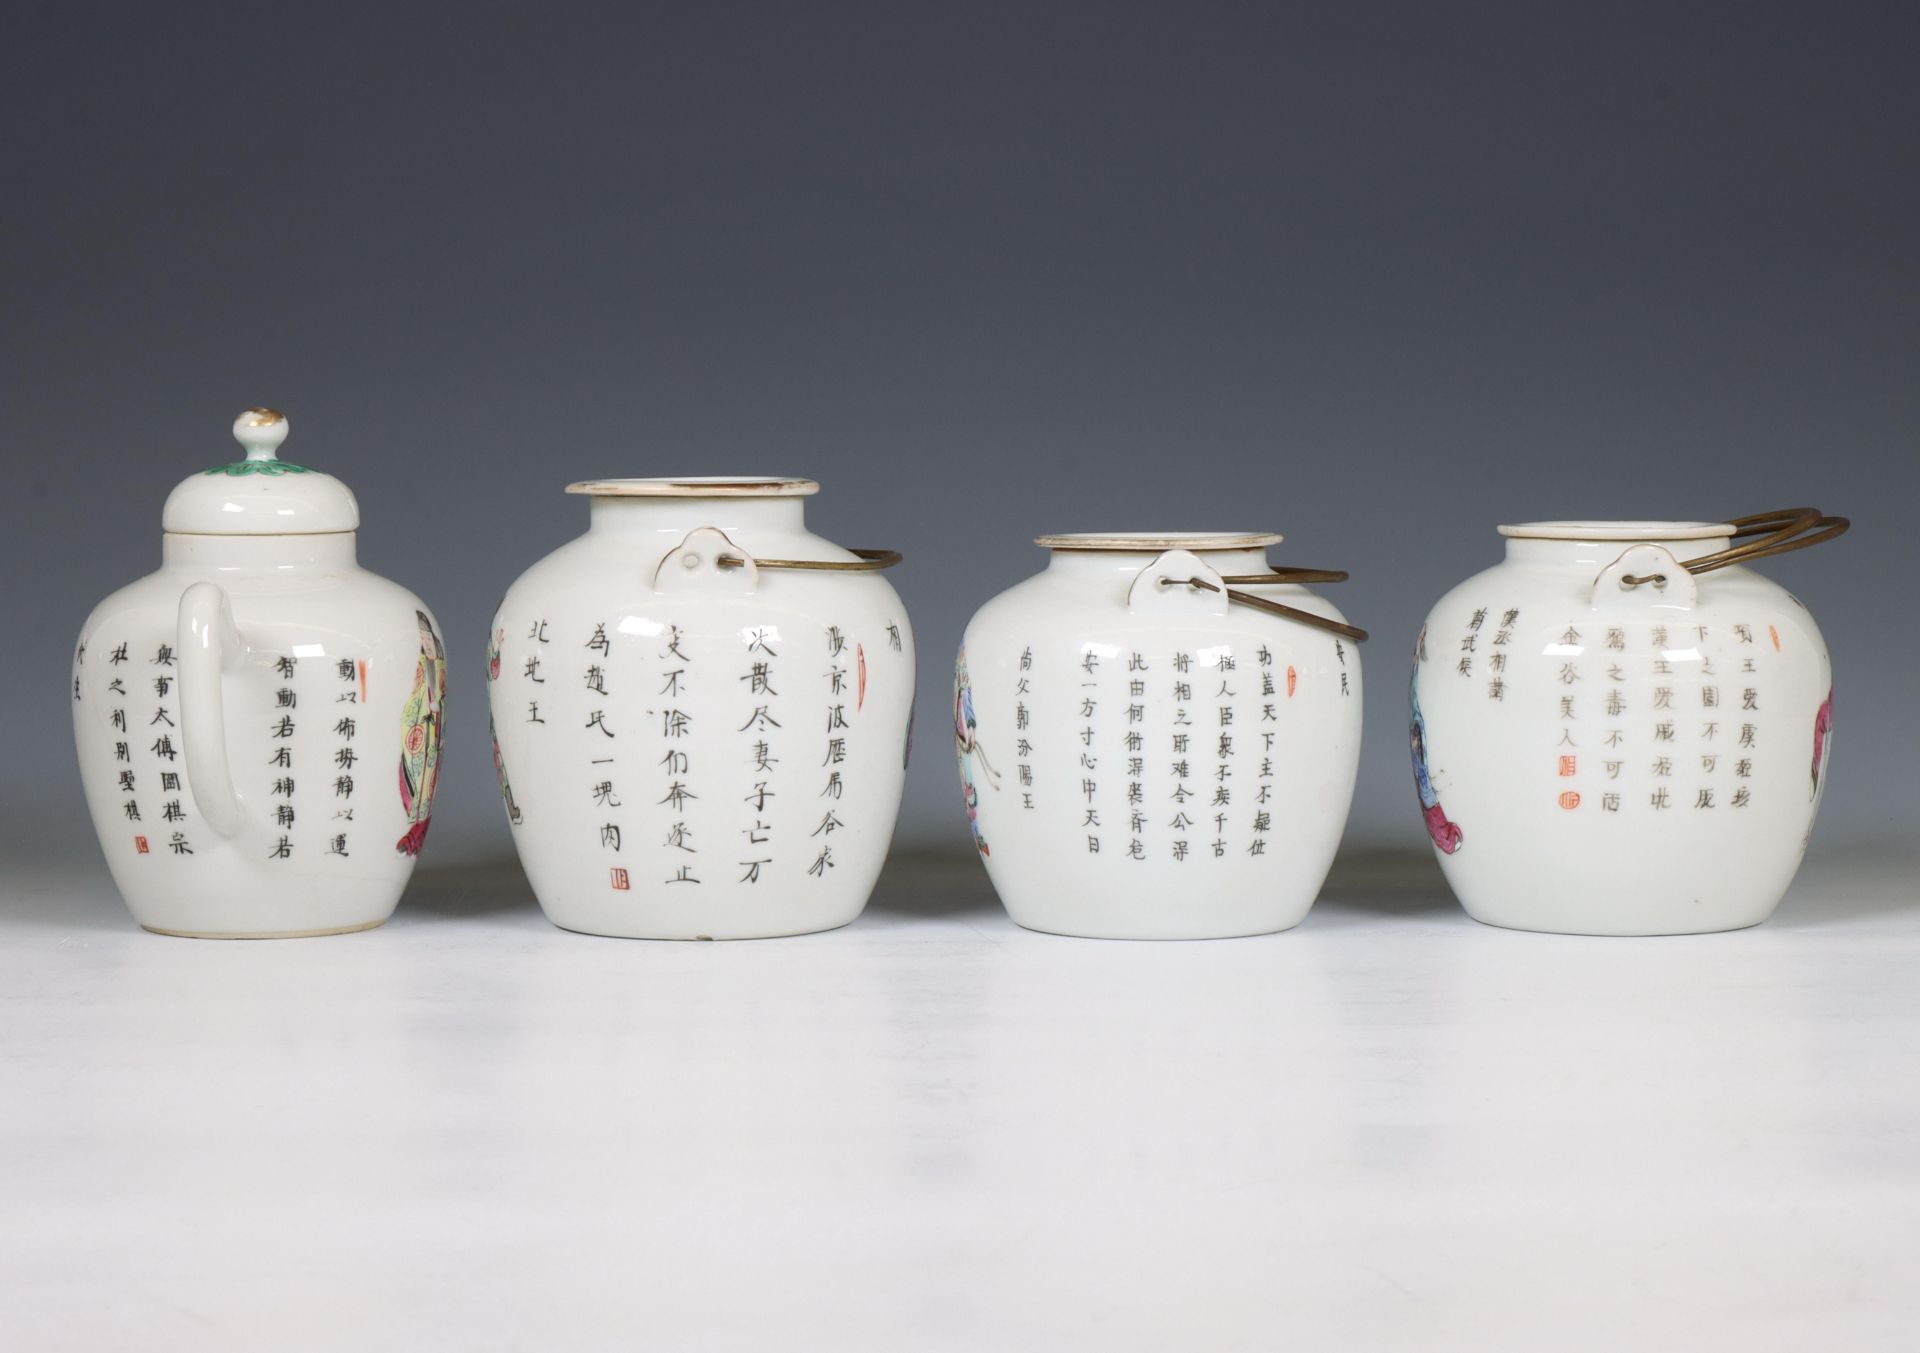 China, four famille rose porcelain 'Wu Shuang Pu' barrel-shaped teapots and covers, 19th century, - Image 7 of 7